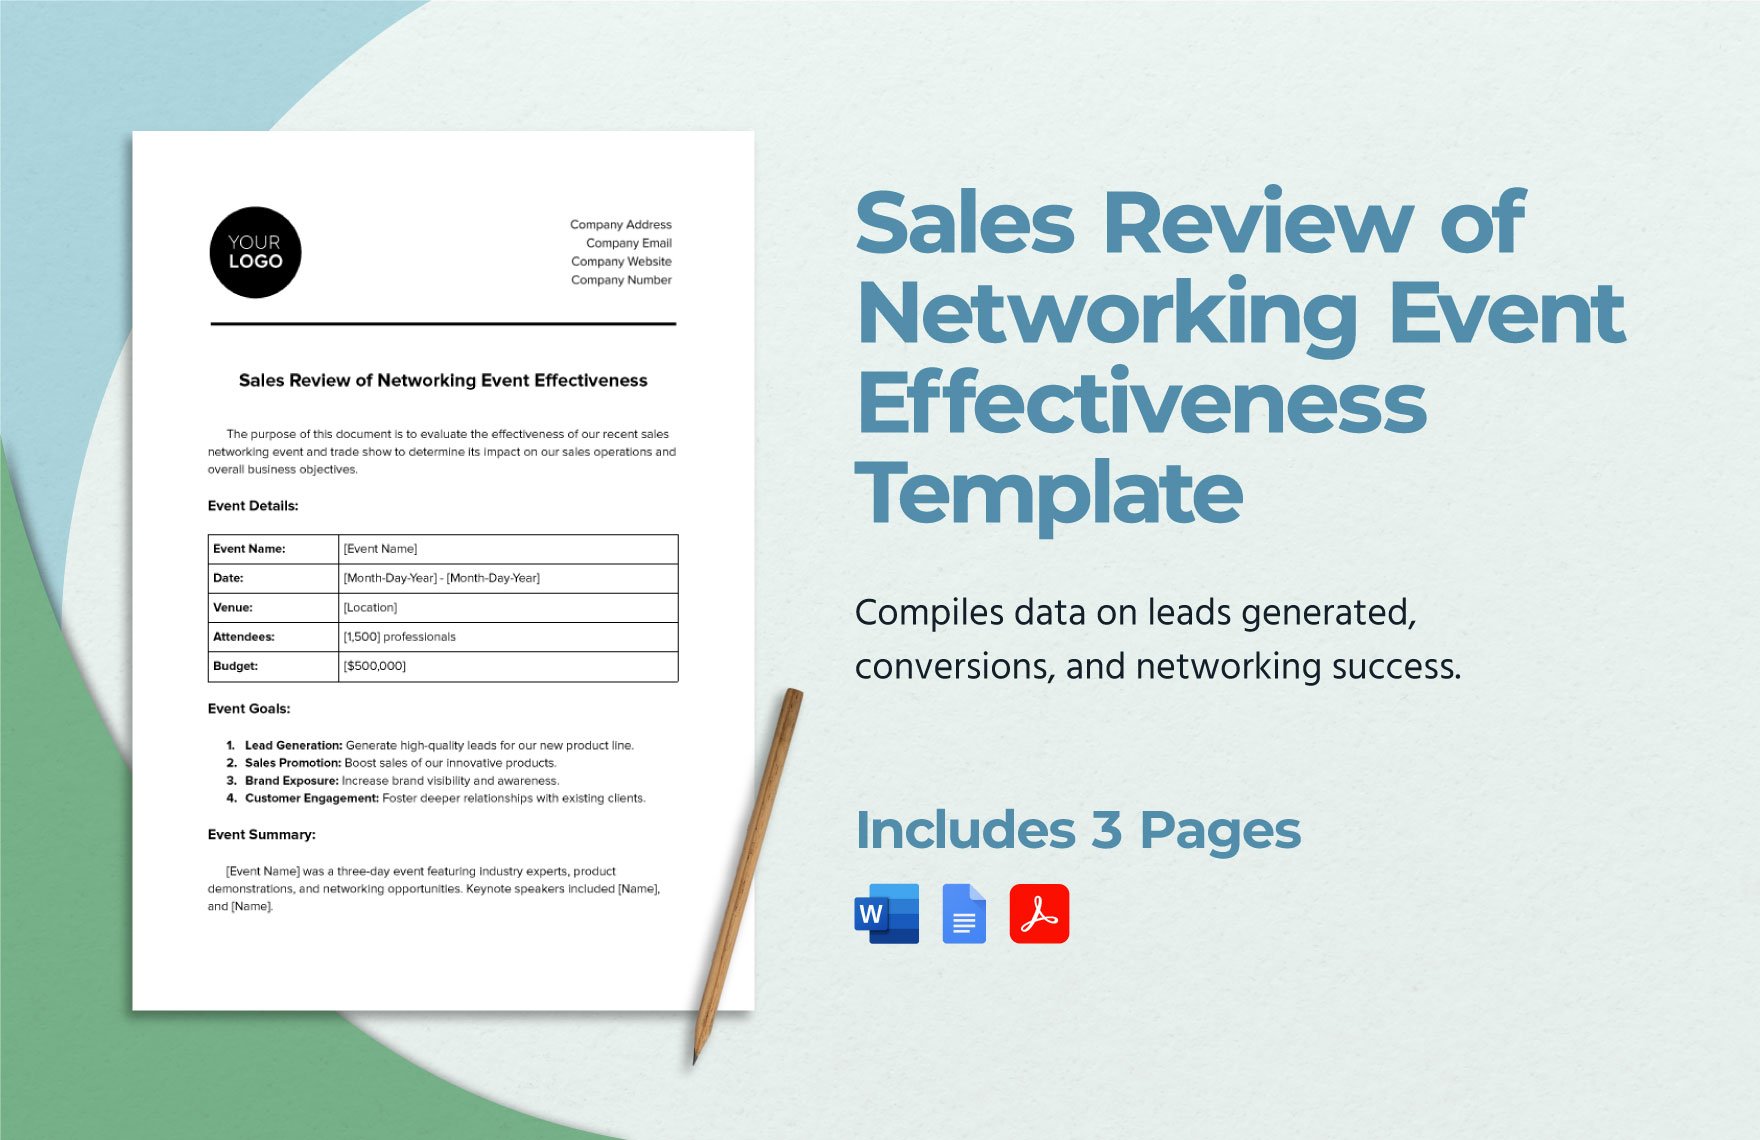 Sales Review of Networking Event Effectiveness Template